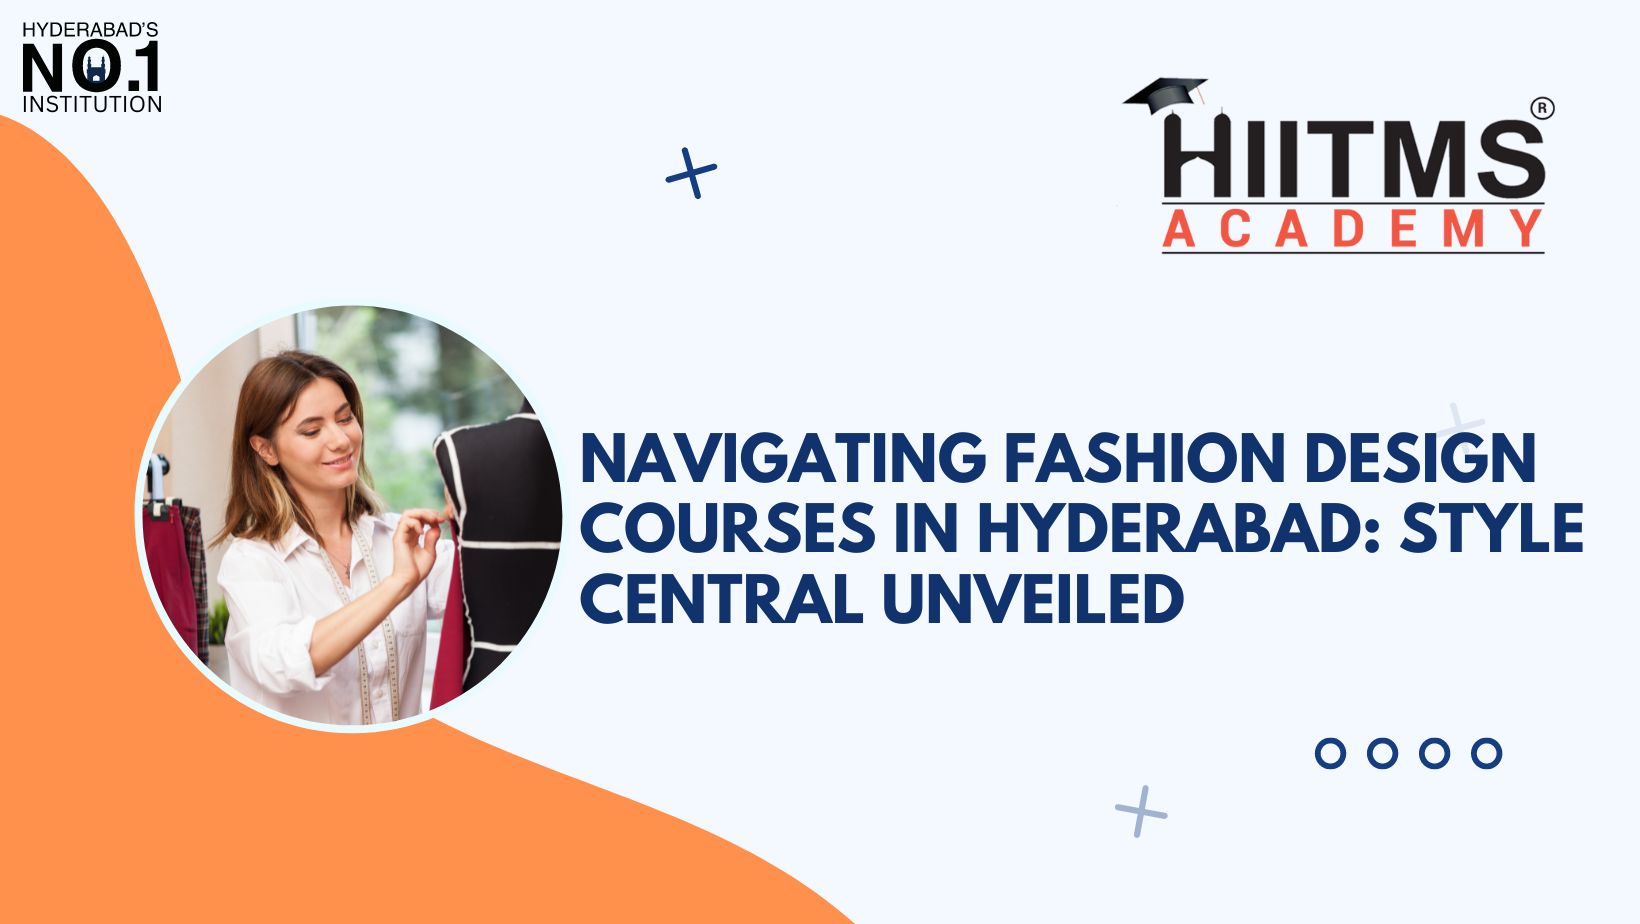 Navigating Fashion Design Courses in Hyderabad: Style Central Unveiled